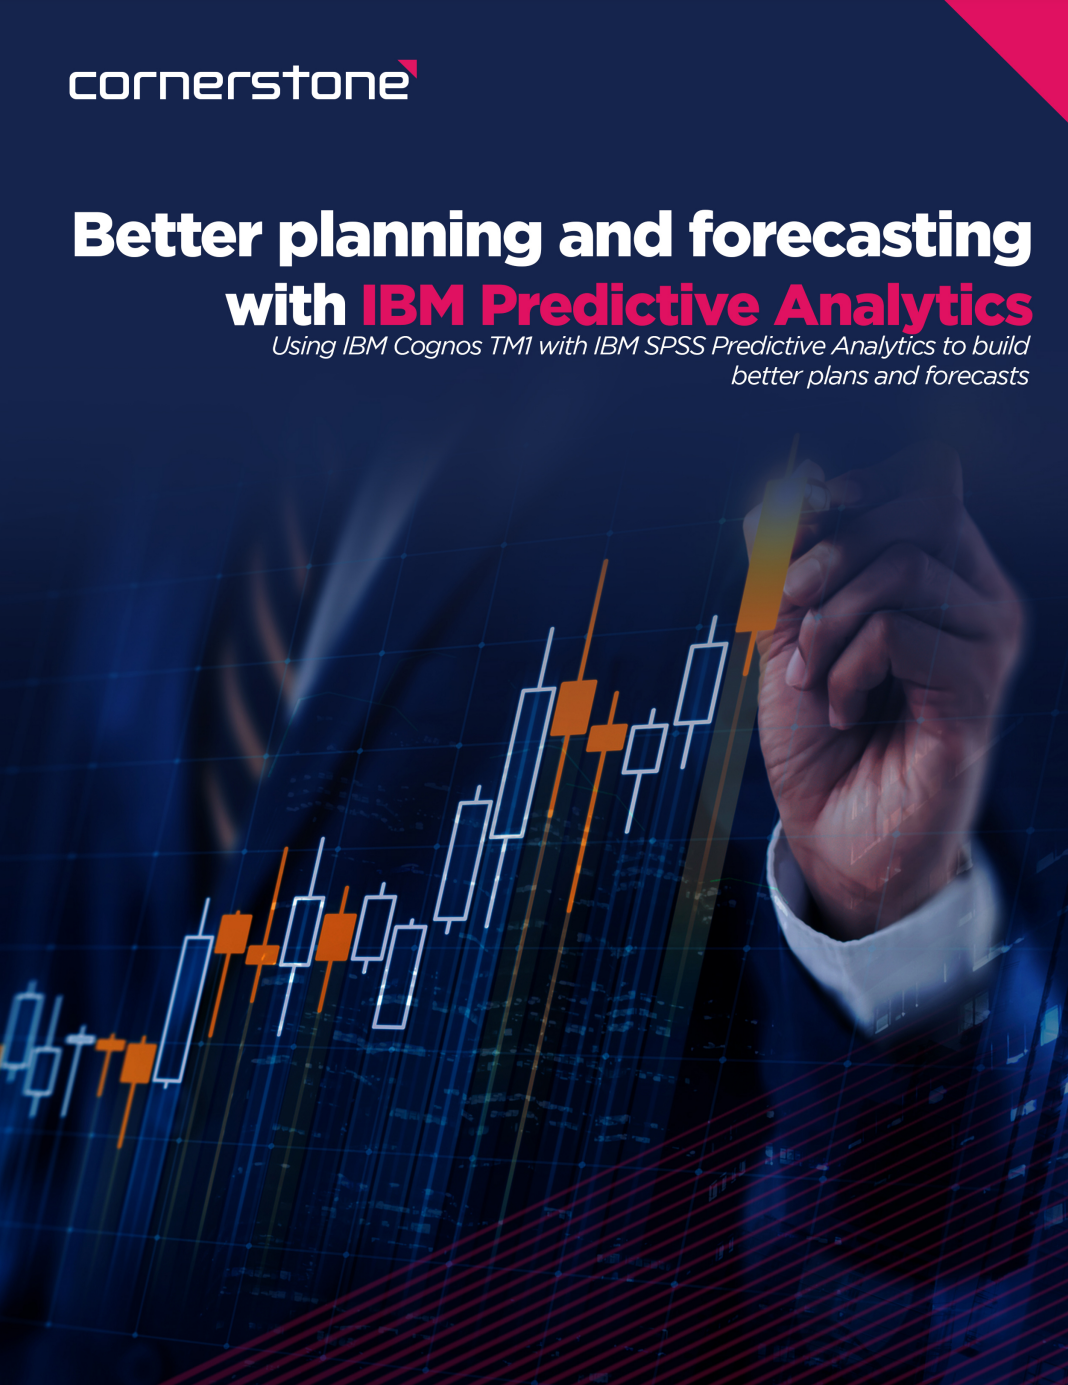 Better planning and forecasting with IBM Predictive Analyticsq